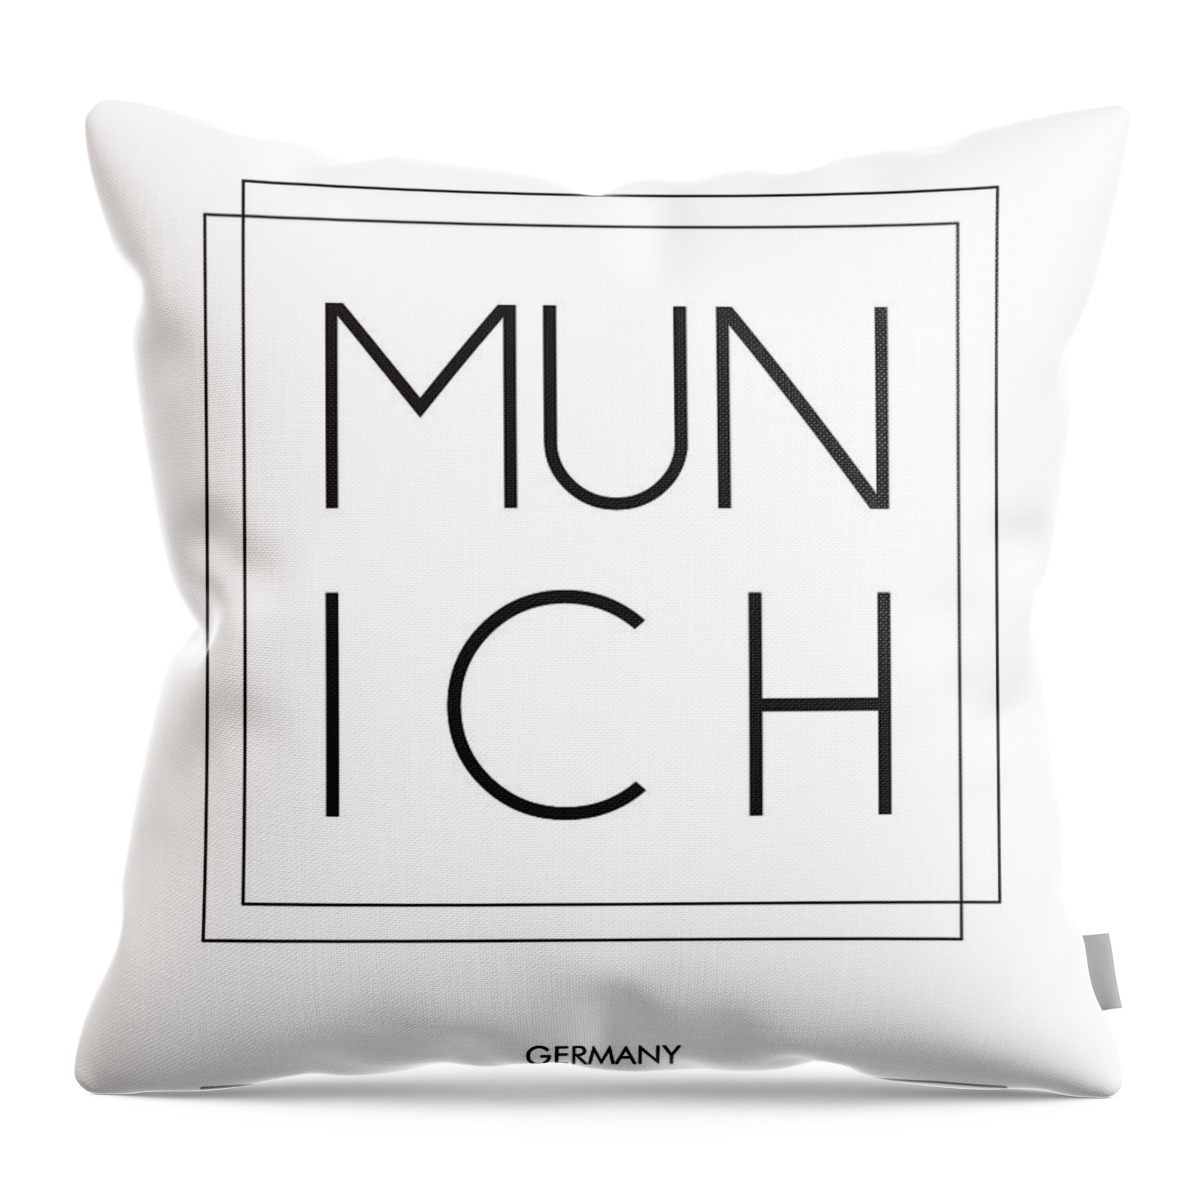 Munich Throw Pillow featuring the mixed media Munich, Germany - City Name Typography - Minimalist City Posters #1 by Studio Grafiikka